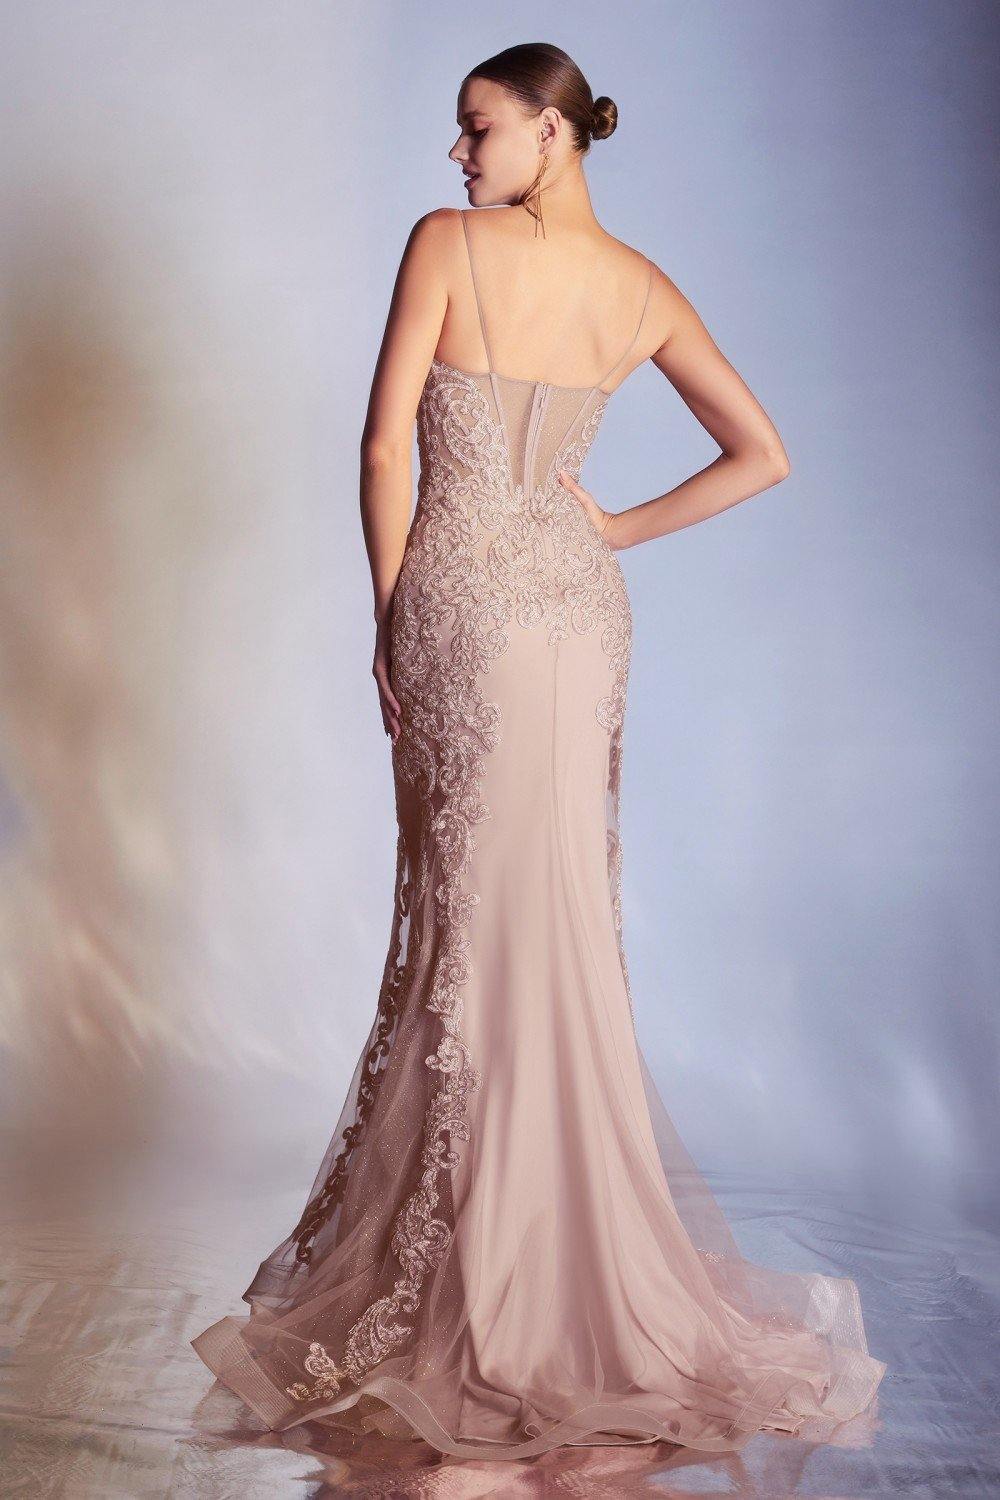 Long Mermaid Gown Prom Dress - The Dress Outlet